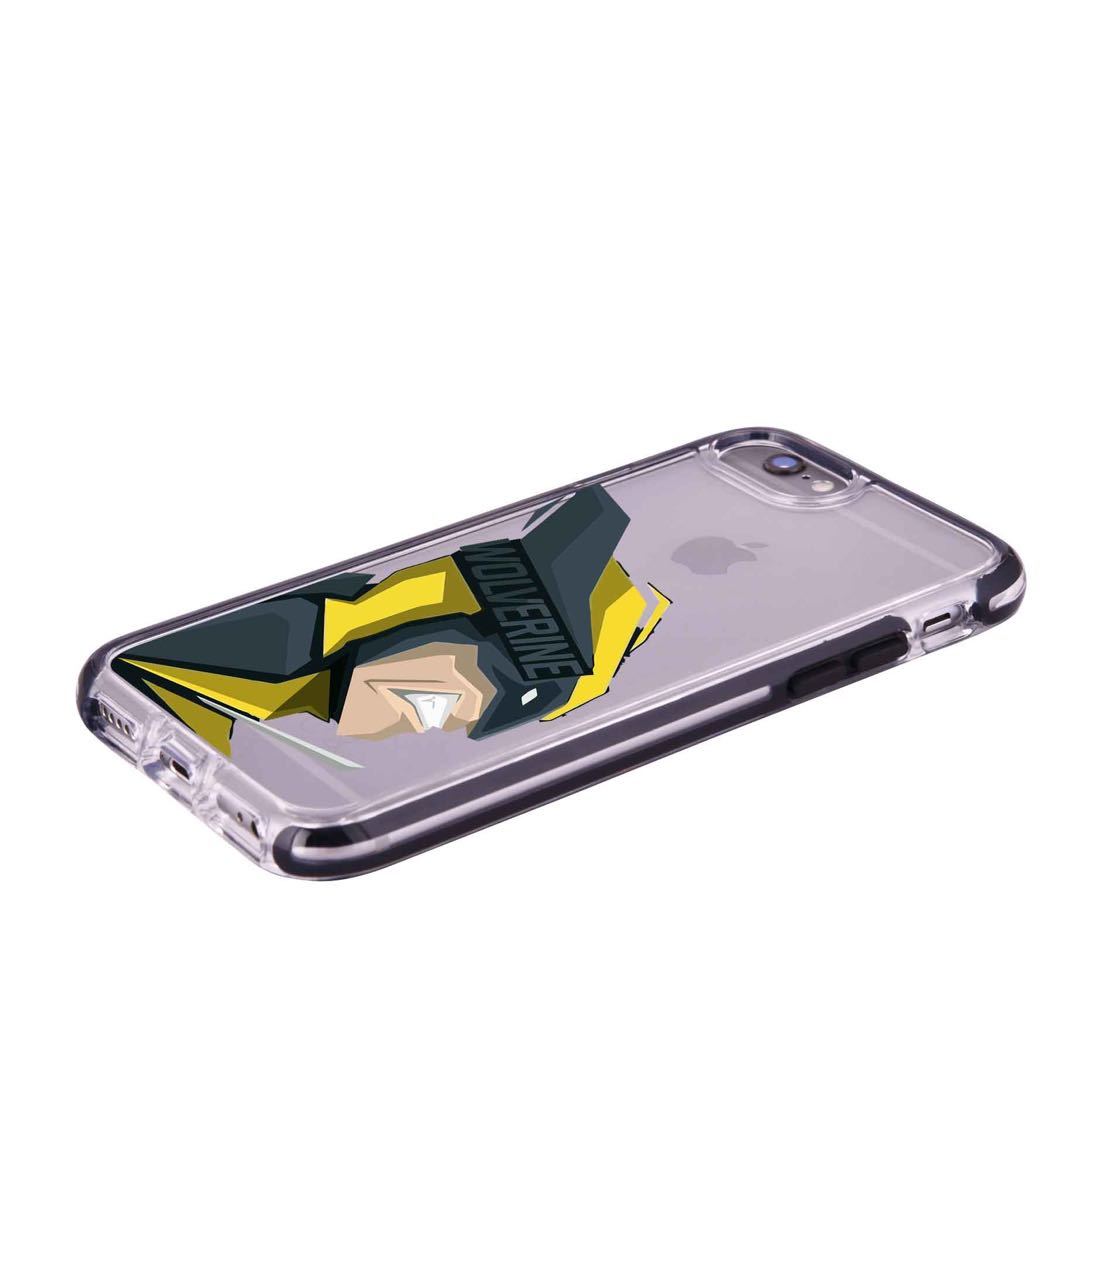 Dont Mess with Wolverine - Extreme Phone Case for iPhone 6S